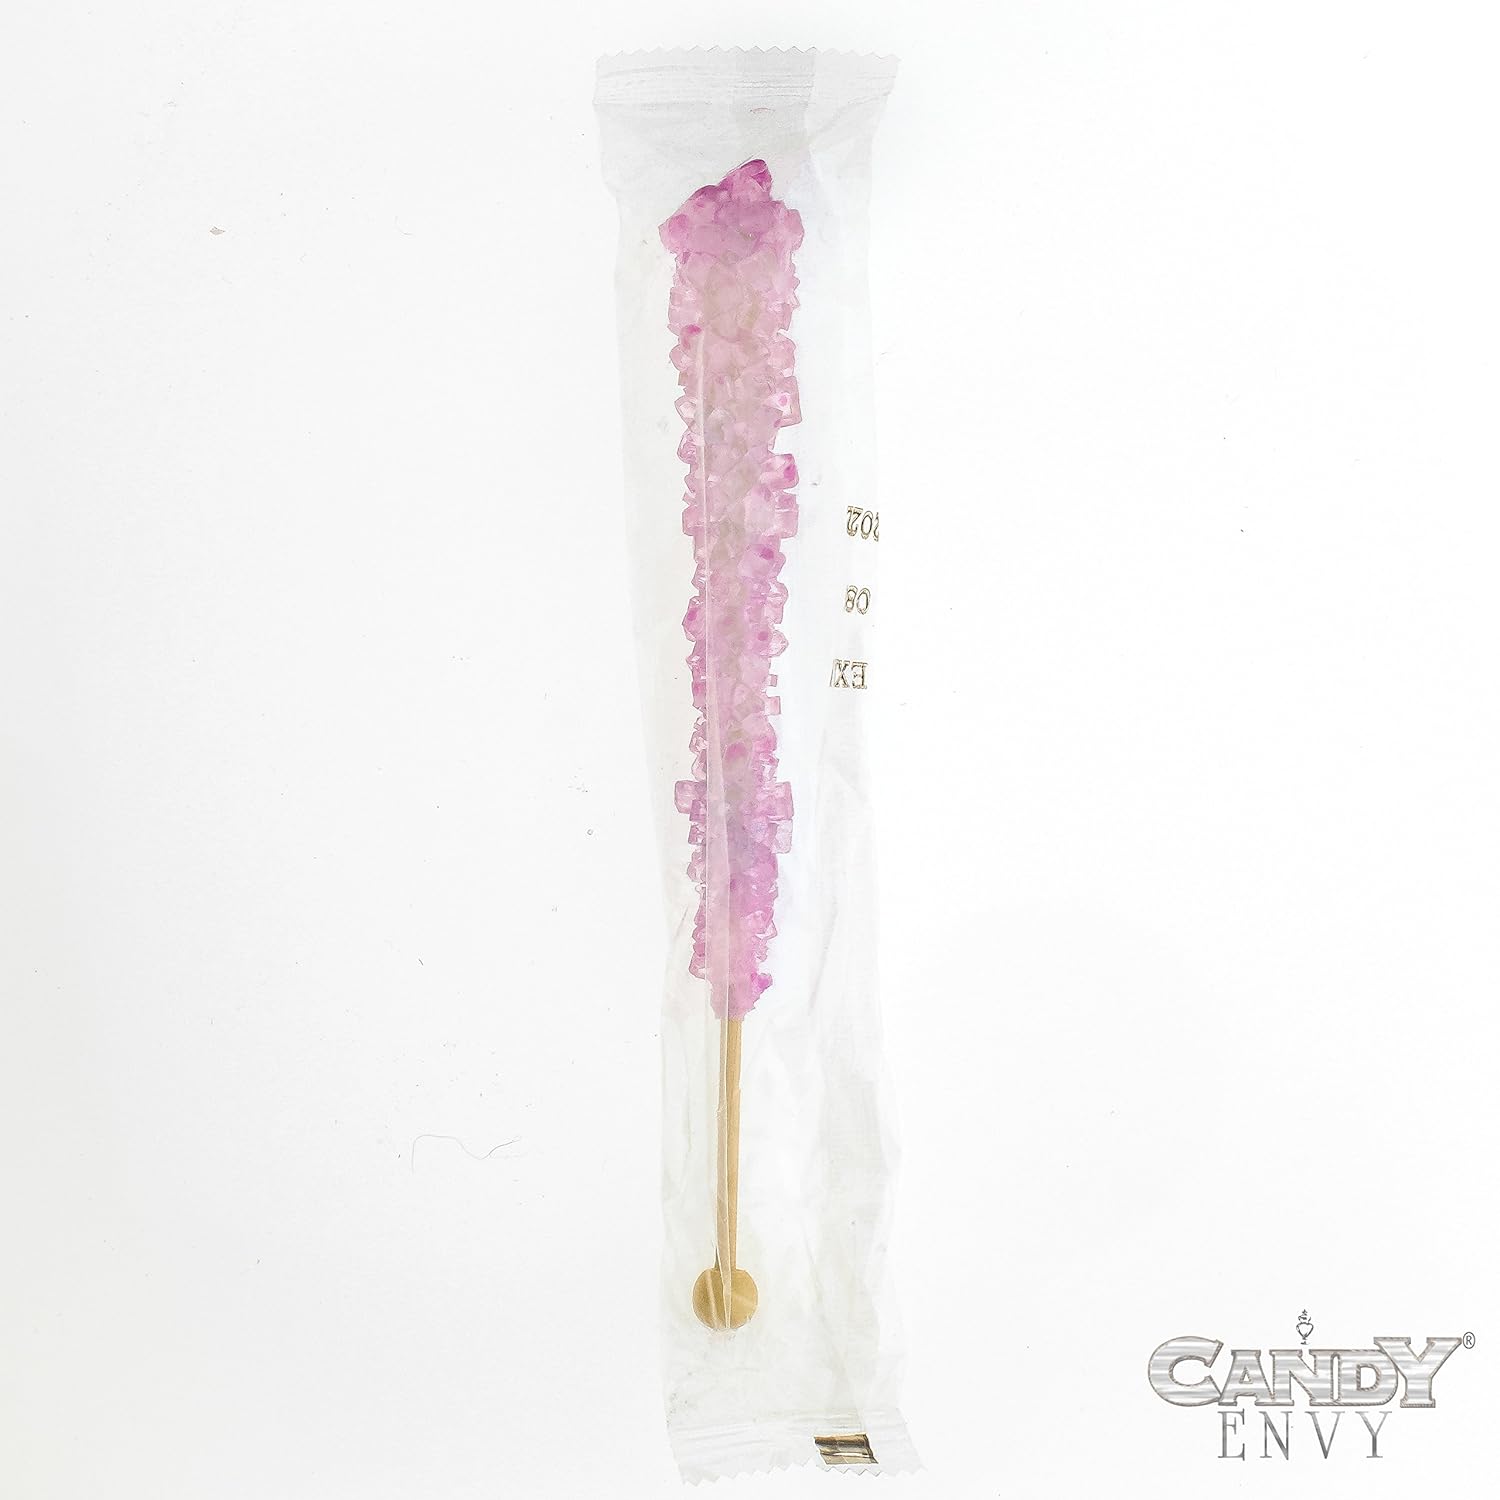  Candy Envy 24 LAVENDER ROCK CANDY STICKS - EXTRA LARGE - ORIGINAL FLAVOR - INDIVIDUALLY WRAPPED ROCK CANDY ON A STICK - FREE HOW TO BUILD A CANDY BUFFET GUIDE INCLUDED